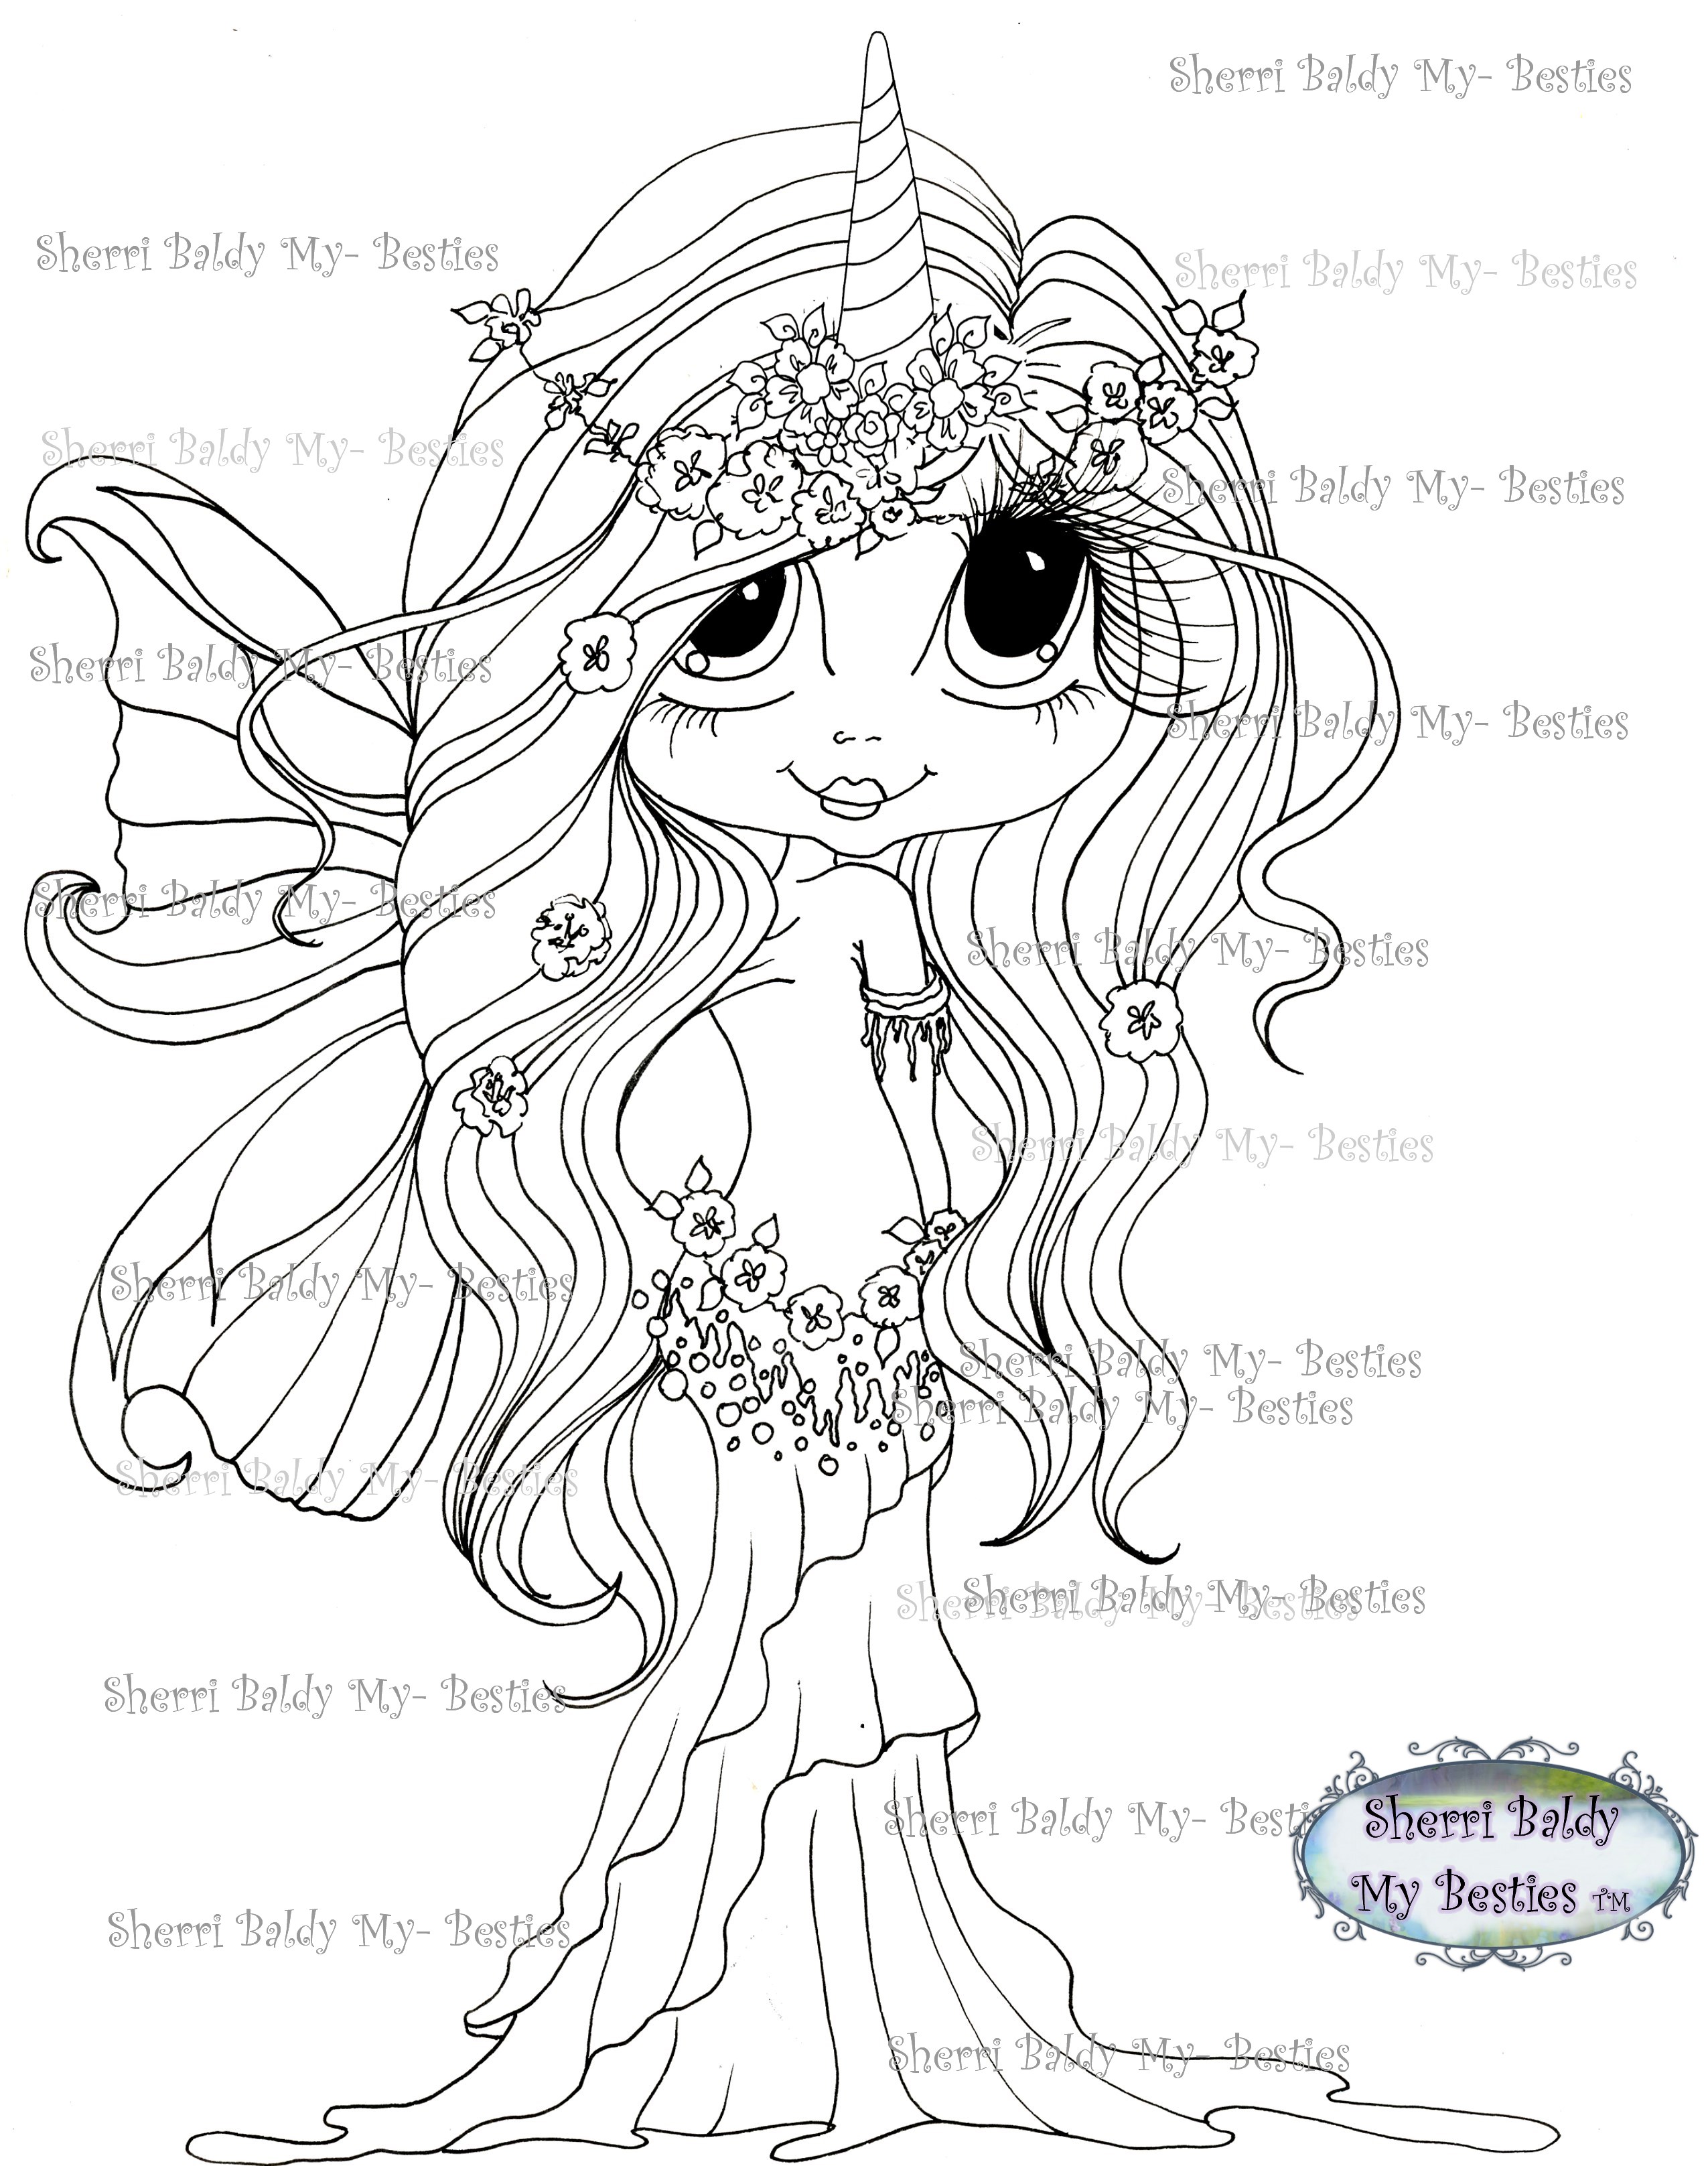 Instant Download My Besties ~ "My Besties Coloring Pages "Enchanted